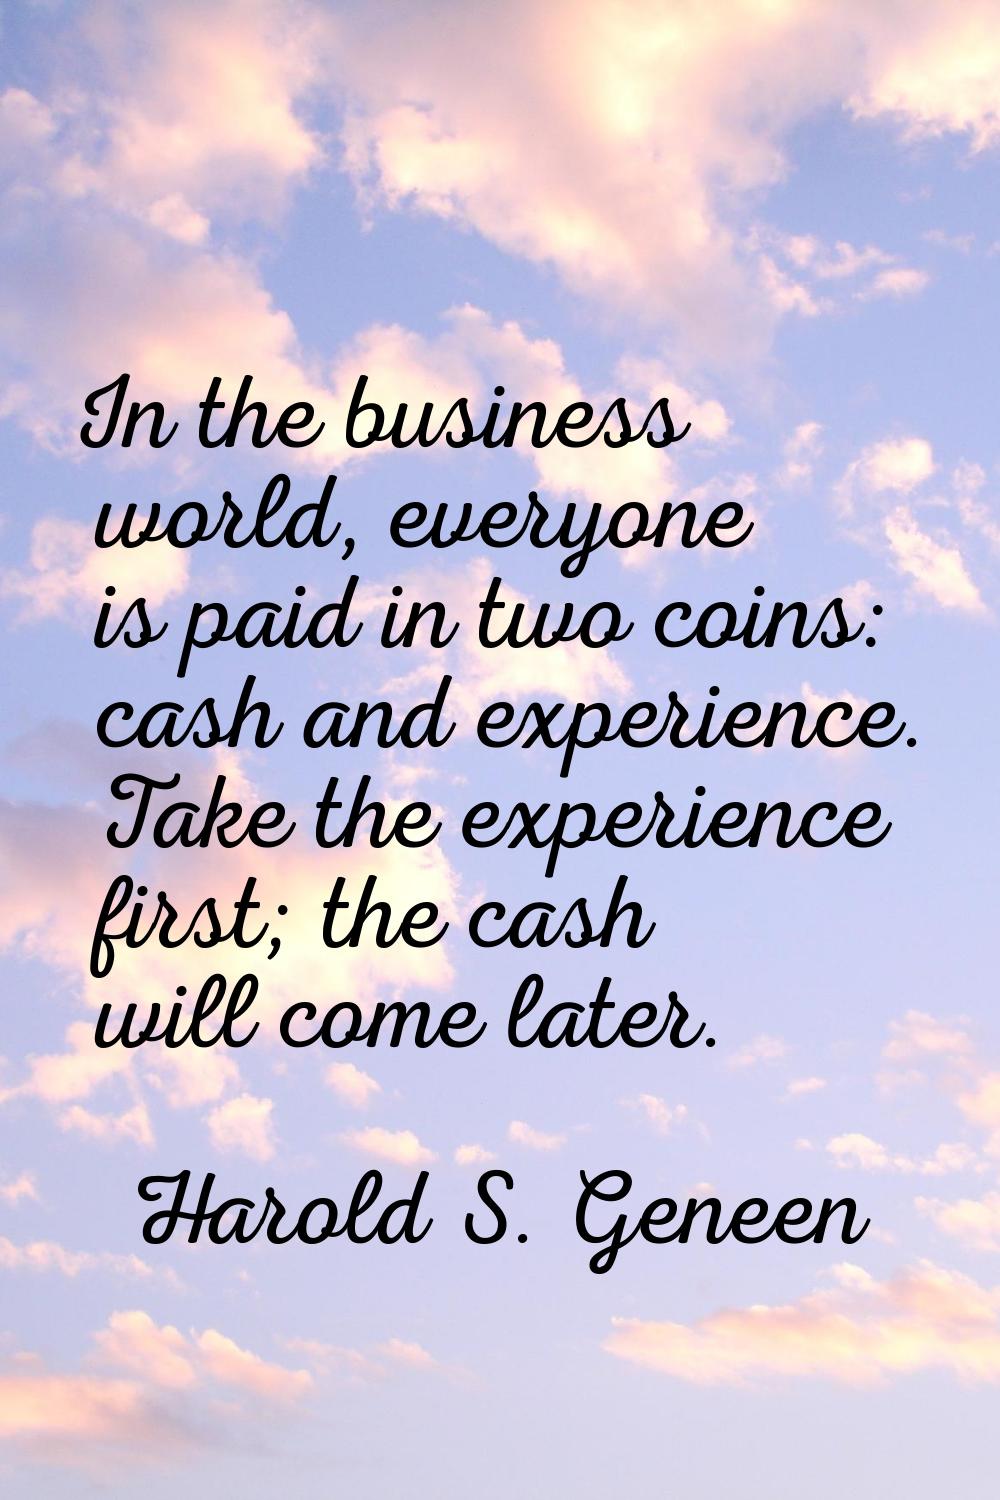 In the business world, everyone is paid in two coins: cash and experience. Take the experience firs